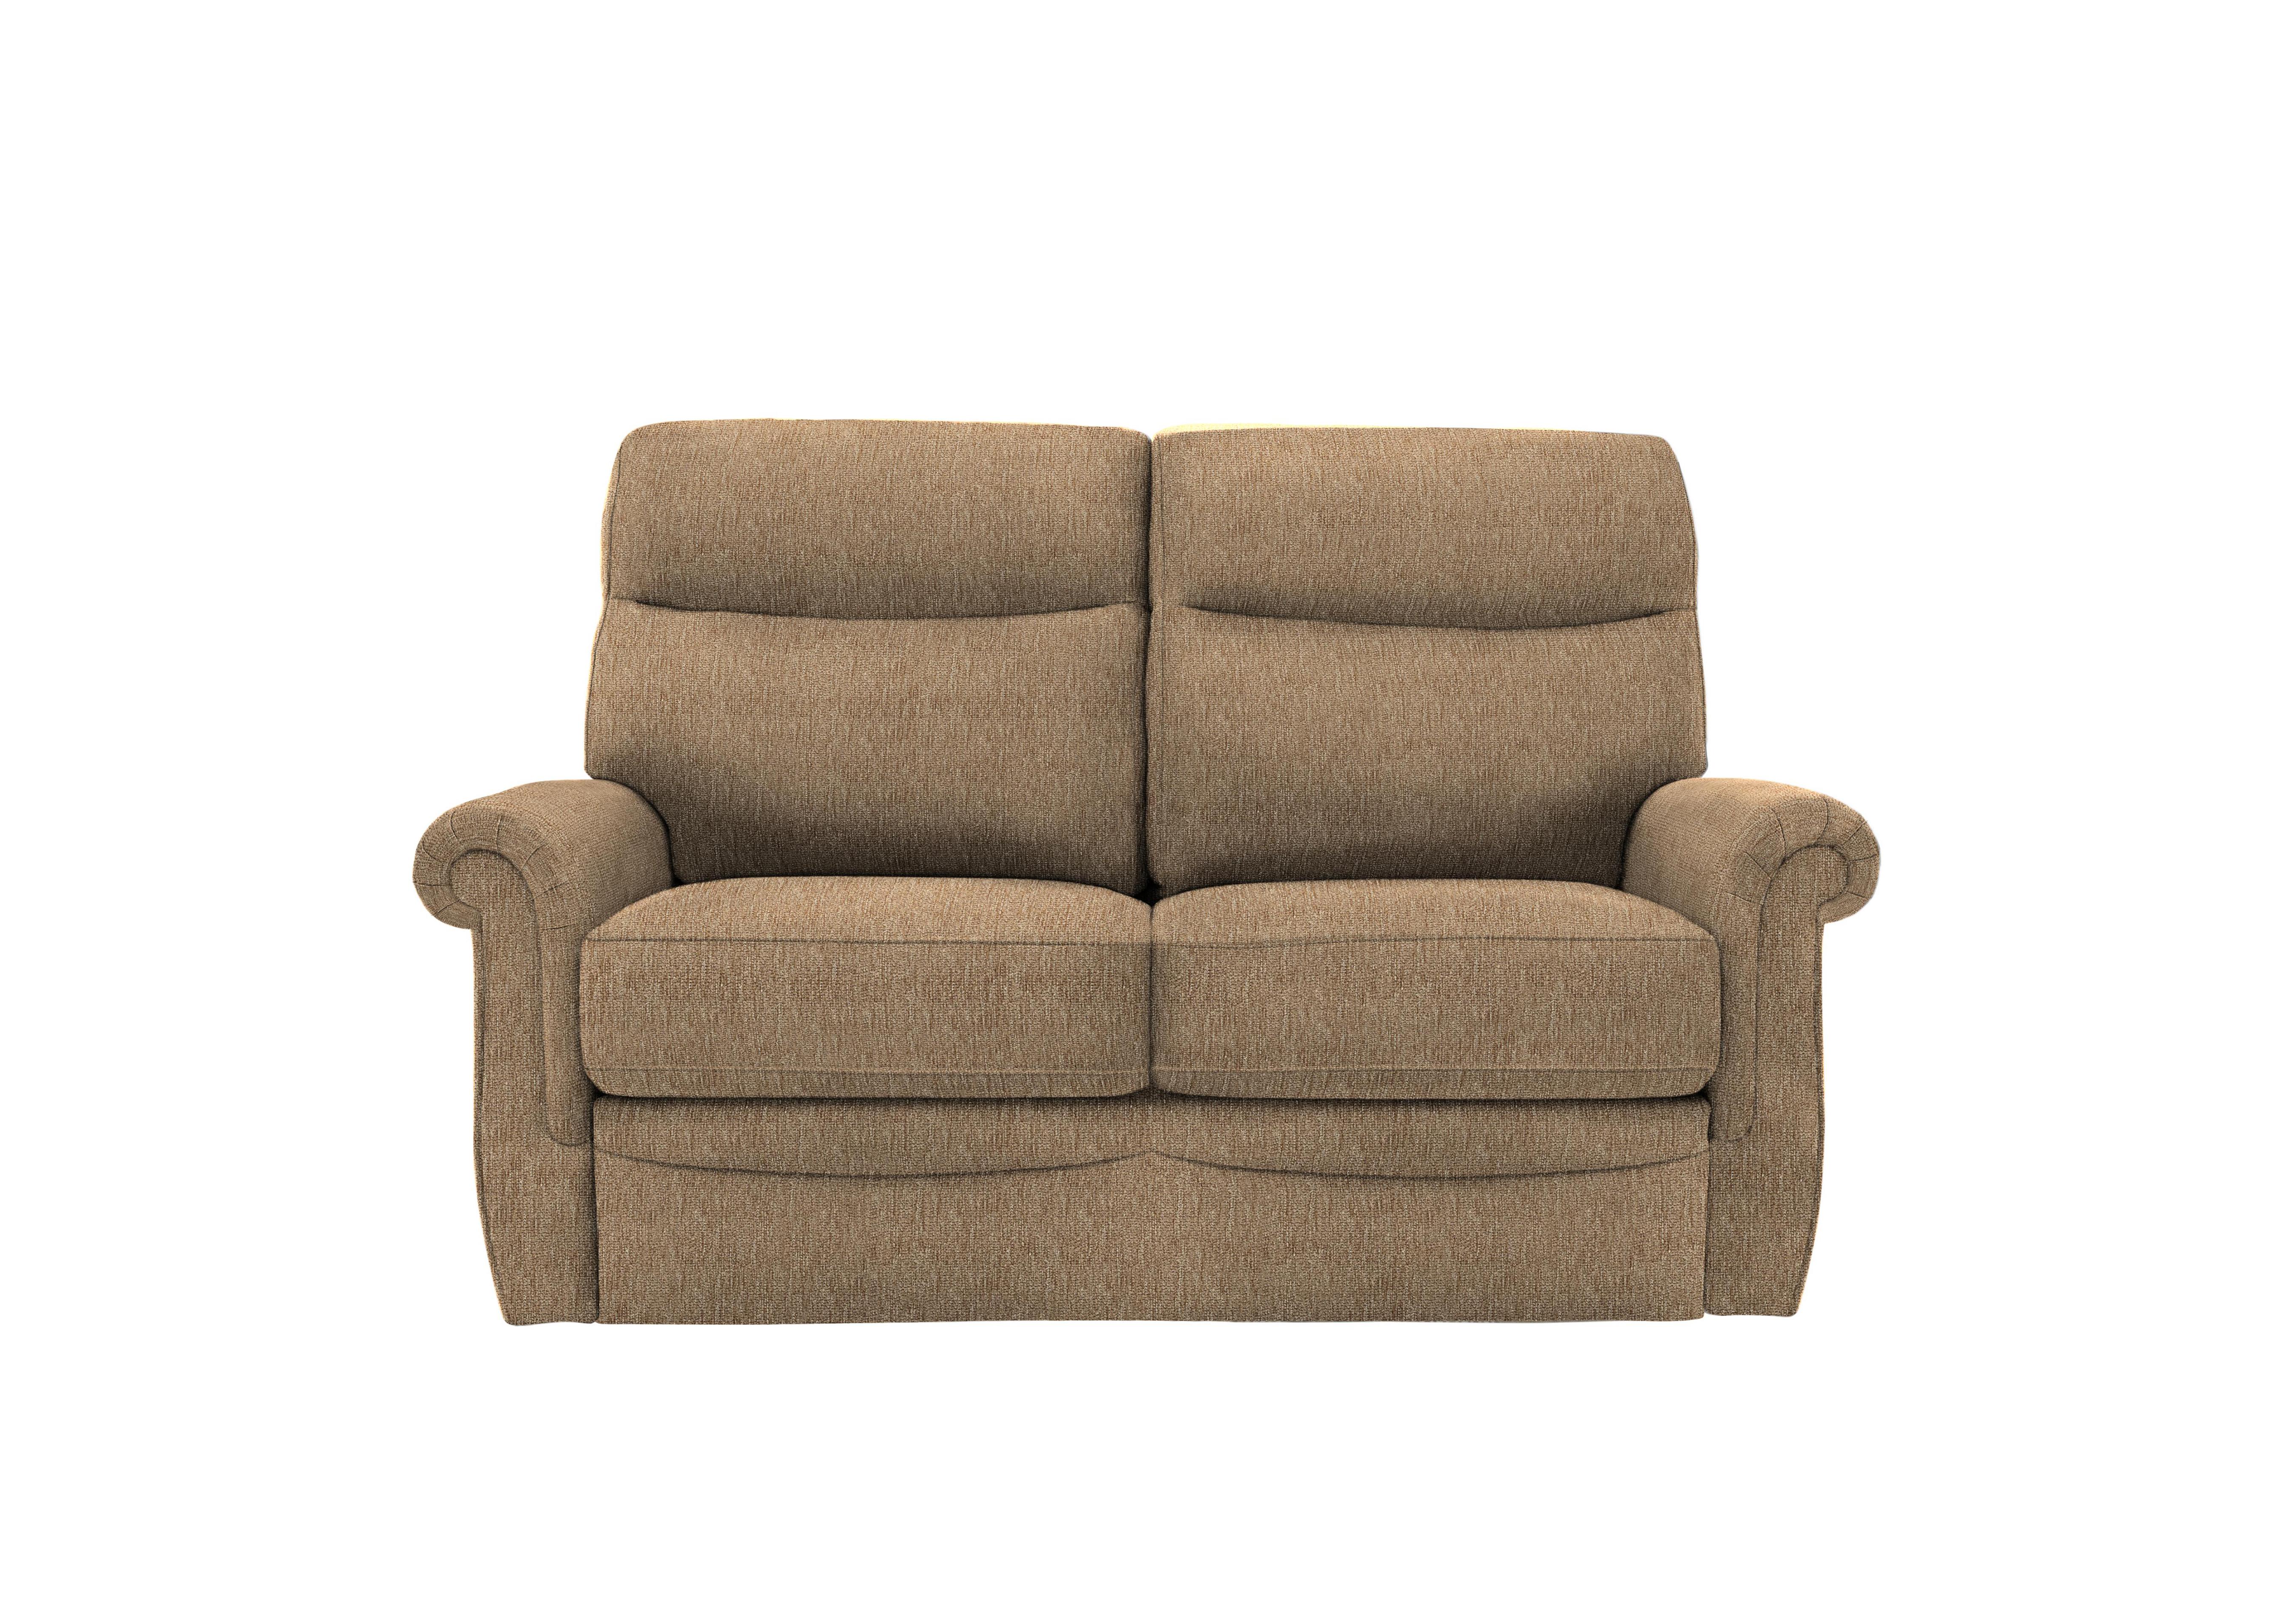 Avon 2 Seater Fabric Sofa in A070 Boucle Cocoa on Furniture Village